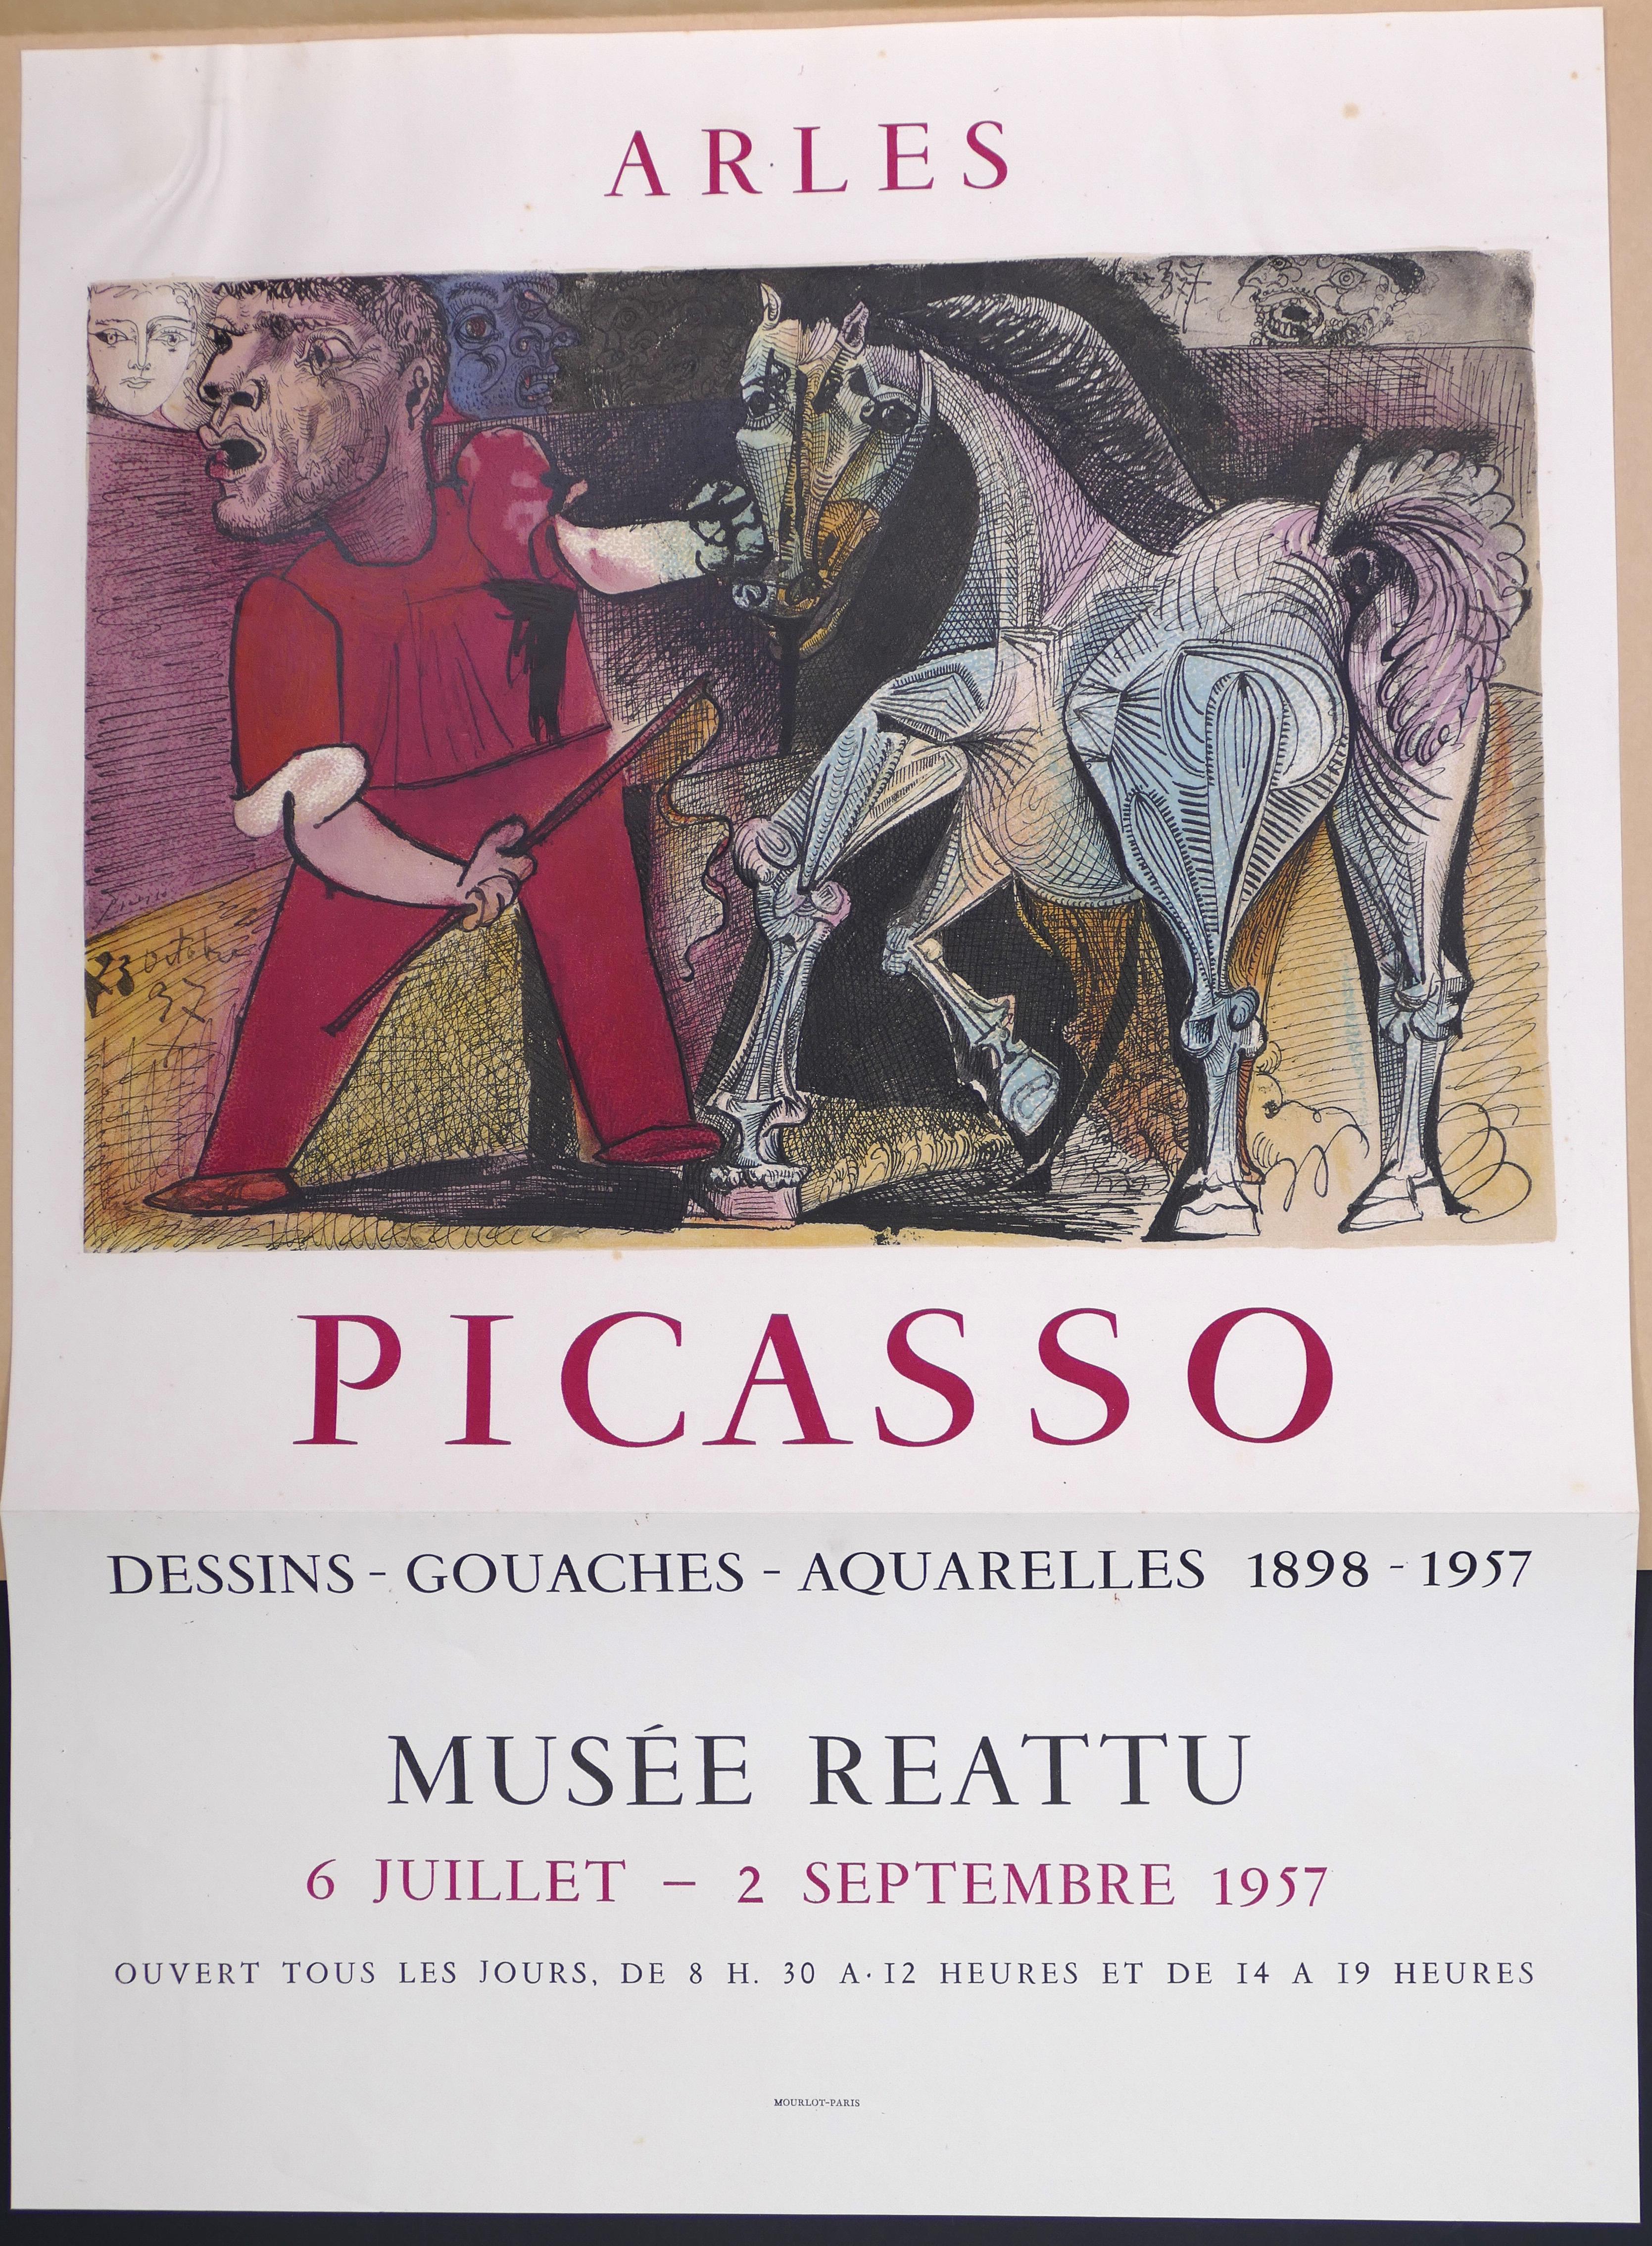 (after) Pablo Picasso Figurative Print - Picasso Vintage Exhibition Poster in Arles - 1957